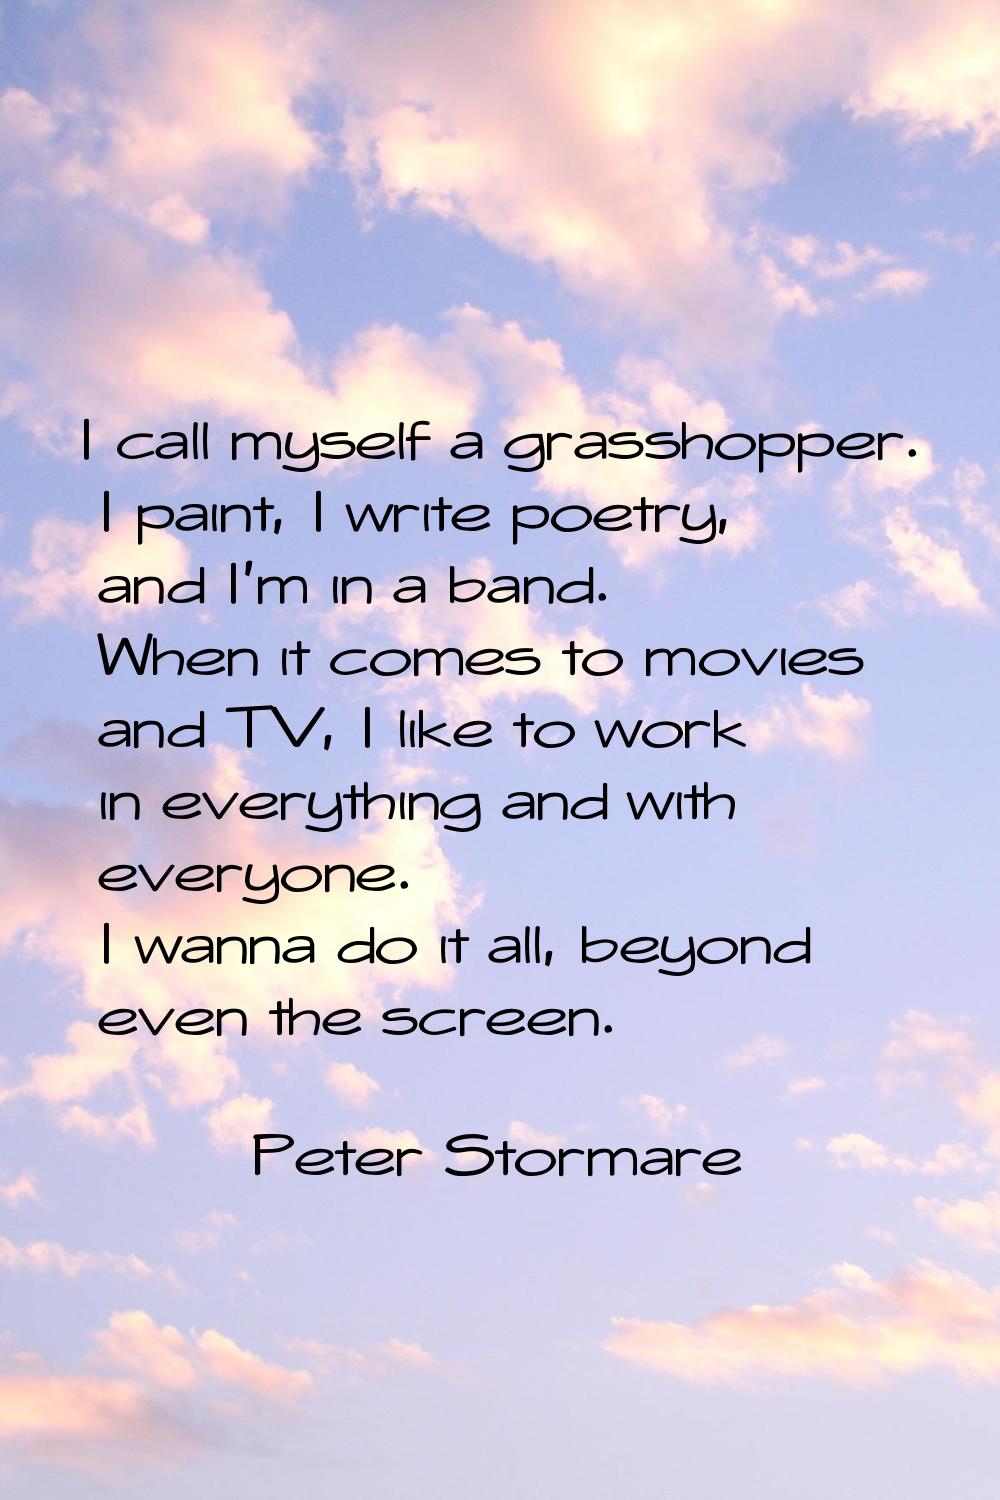 I call myself a grasshopper. I paint, I write poetry, and I'm in a band. When it comes to movies an